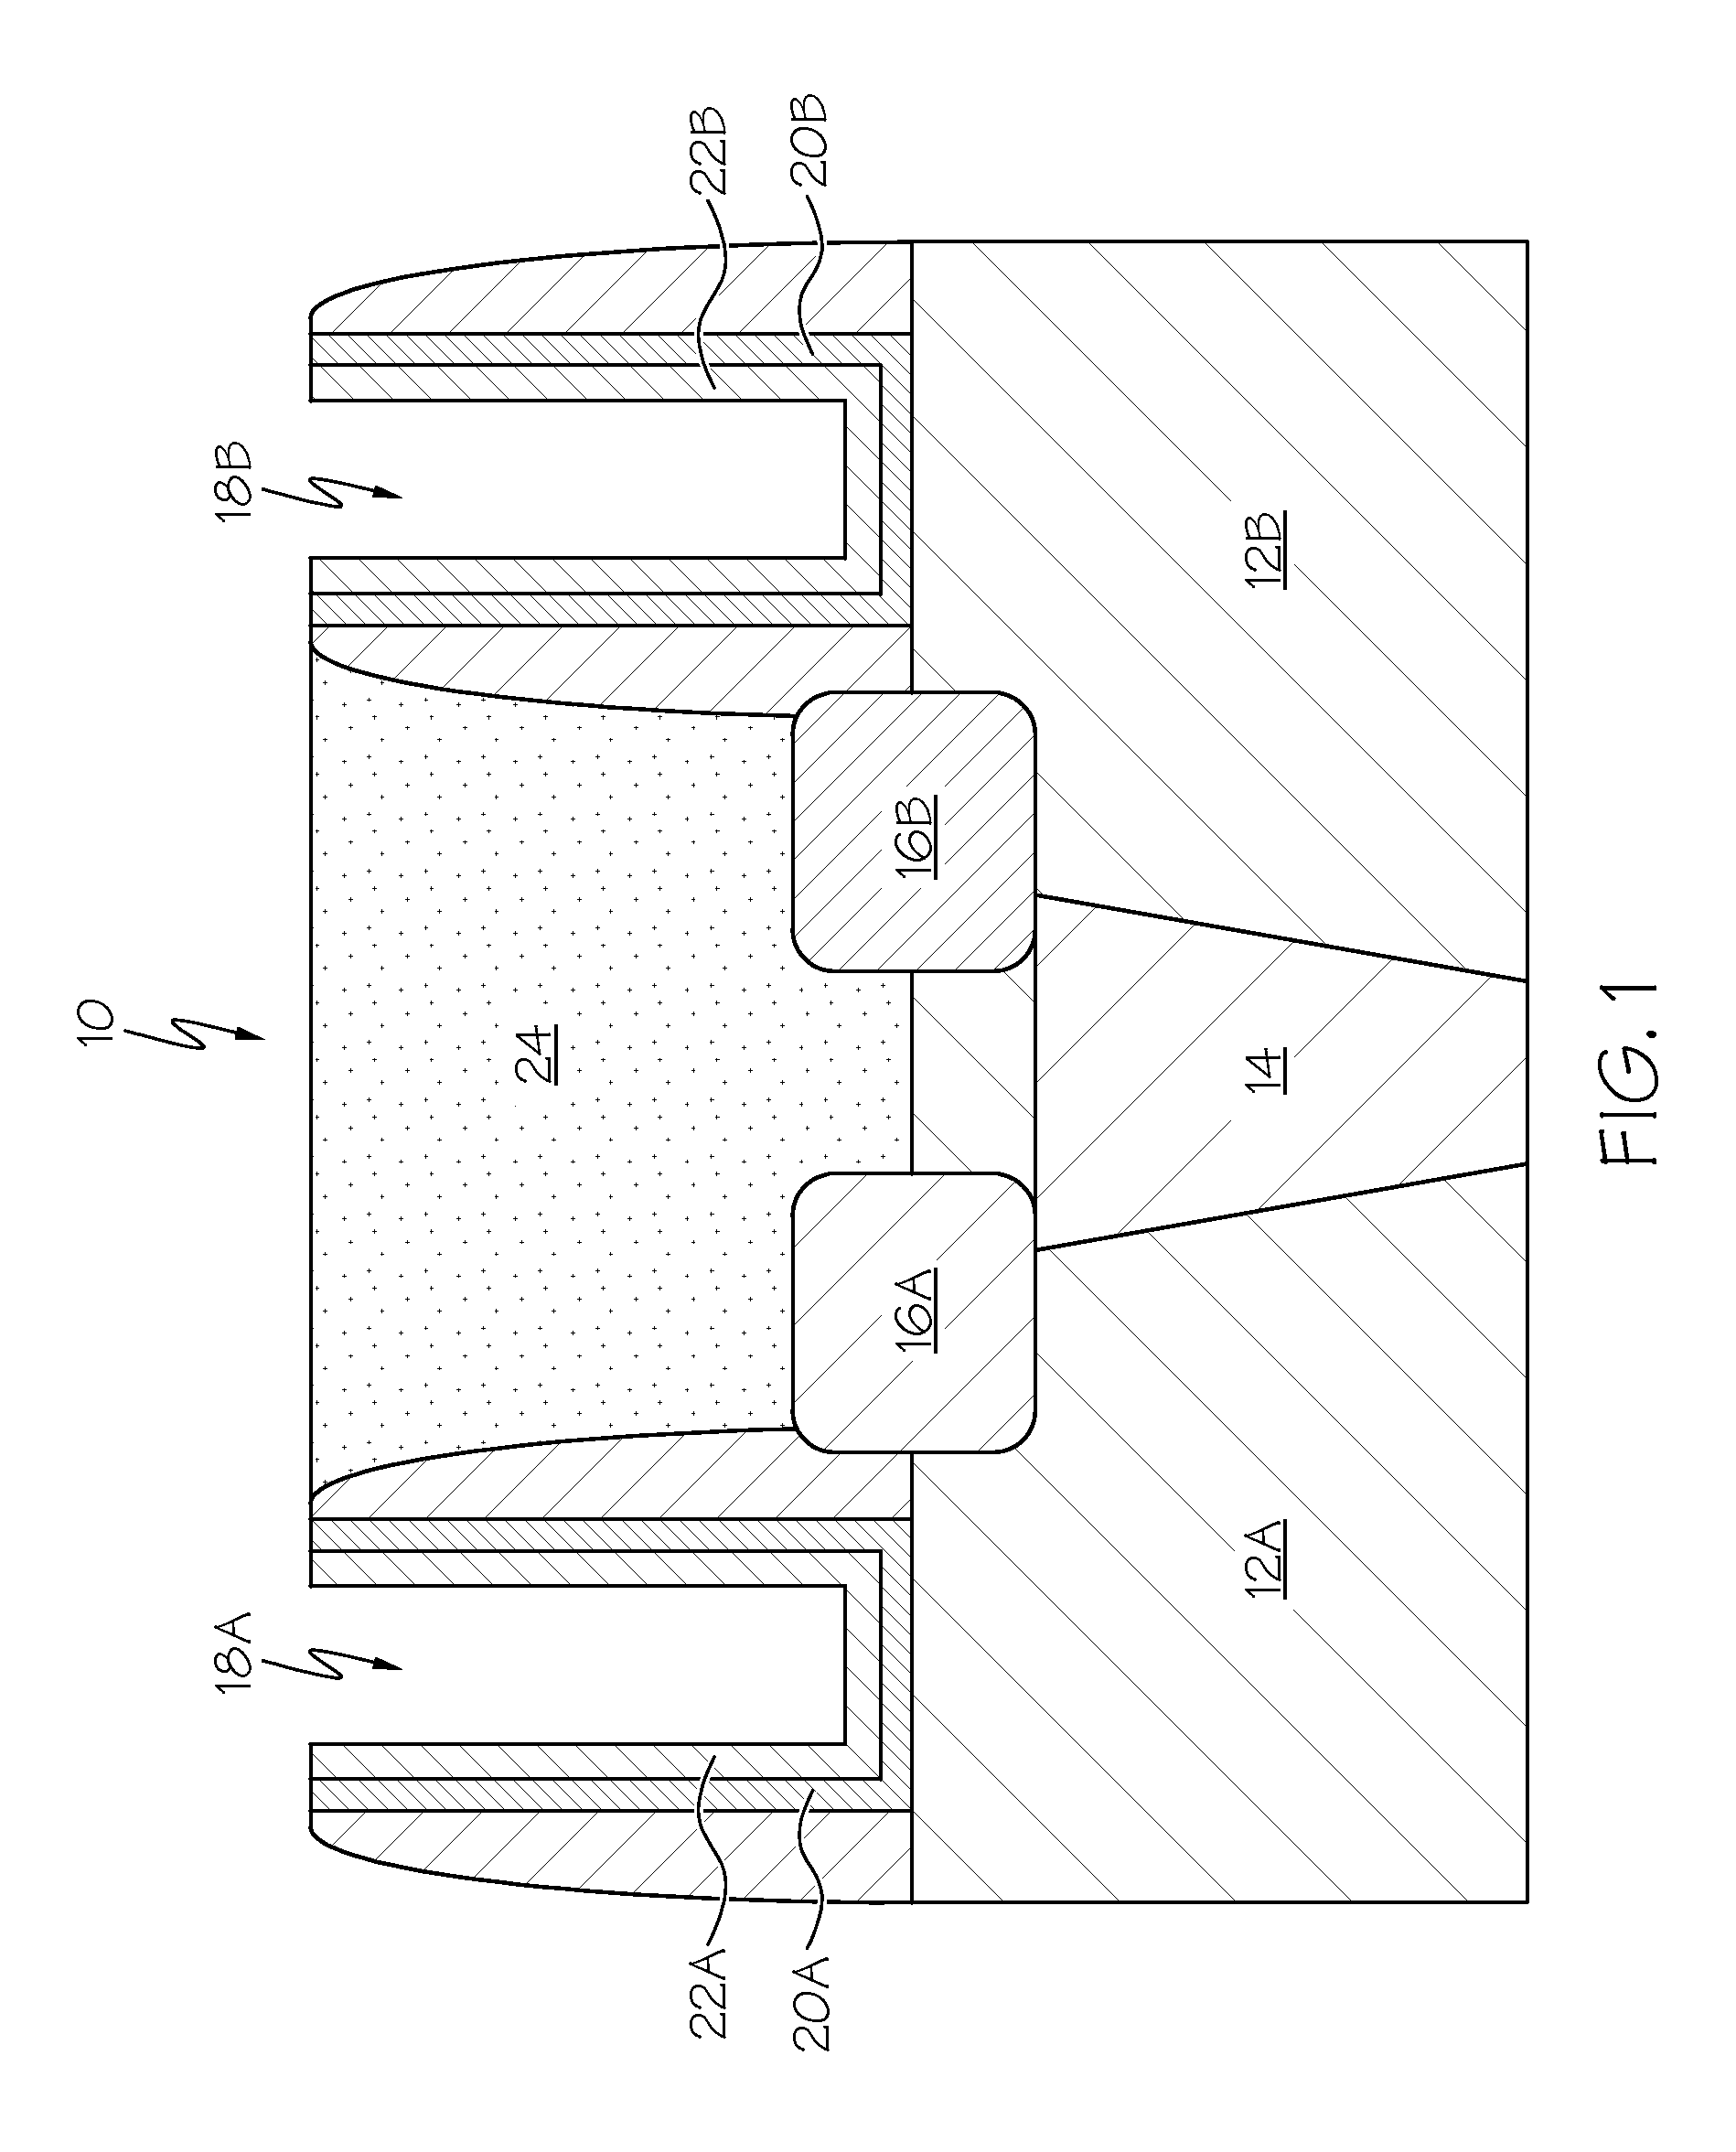 Semiconductor device incorporating a multi-function layer into gate stacks